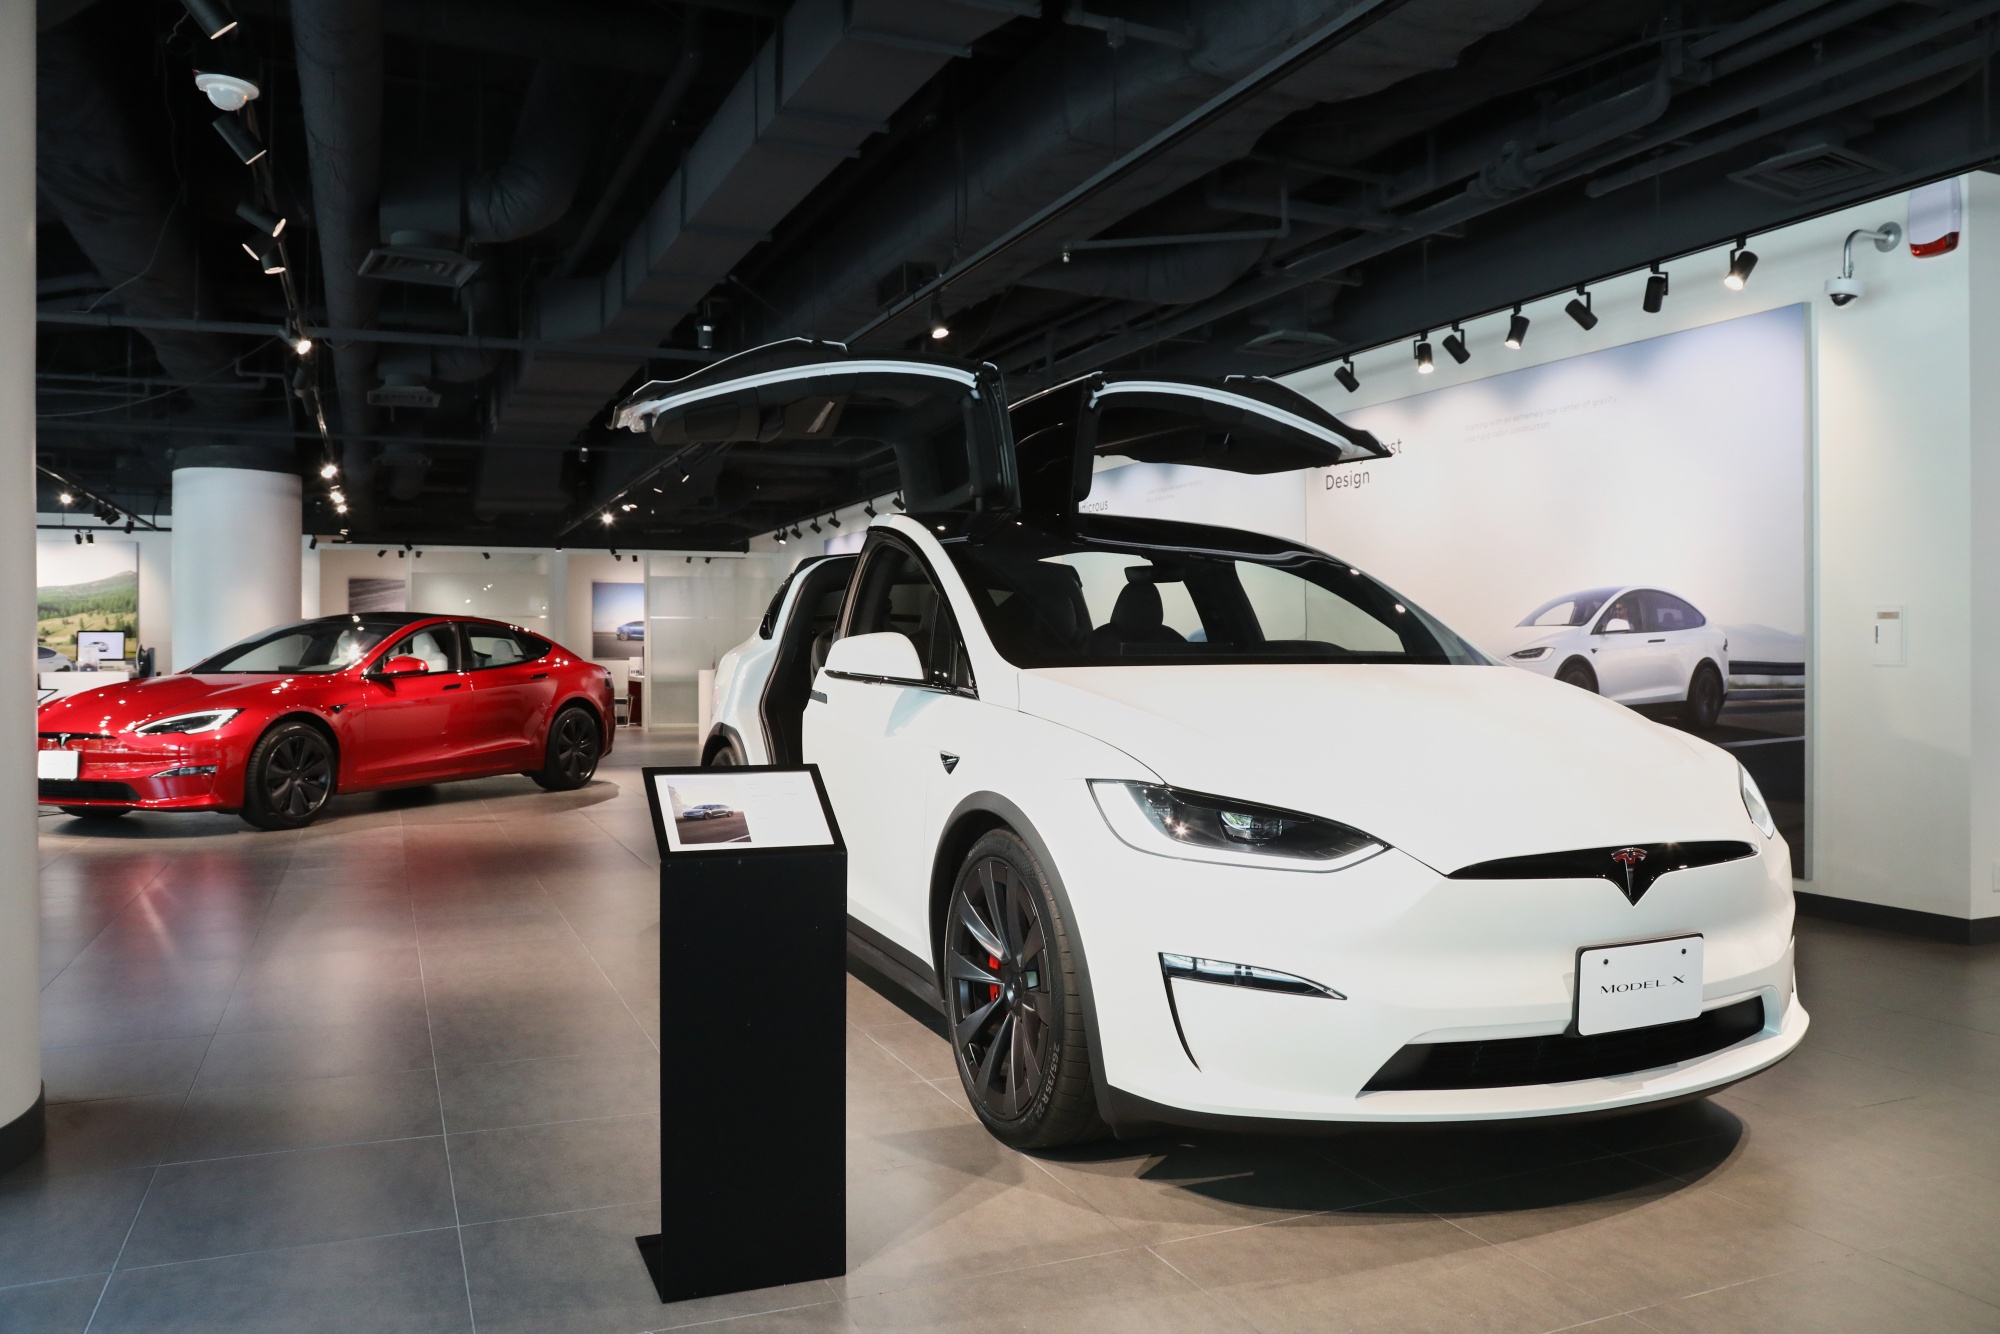 Tesla Slashes Model S, X Prices in China After Model 3 Refresh